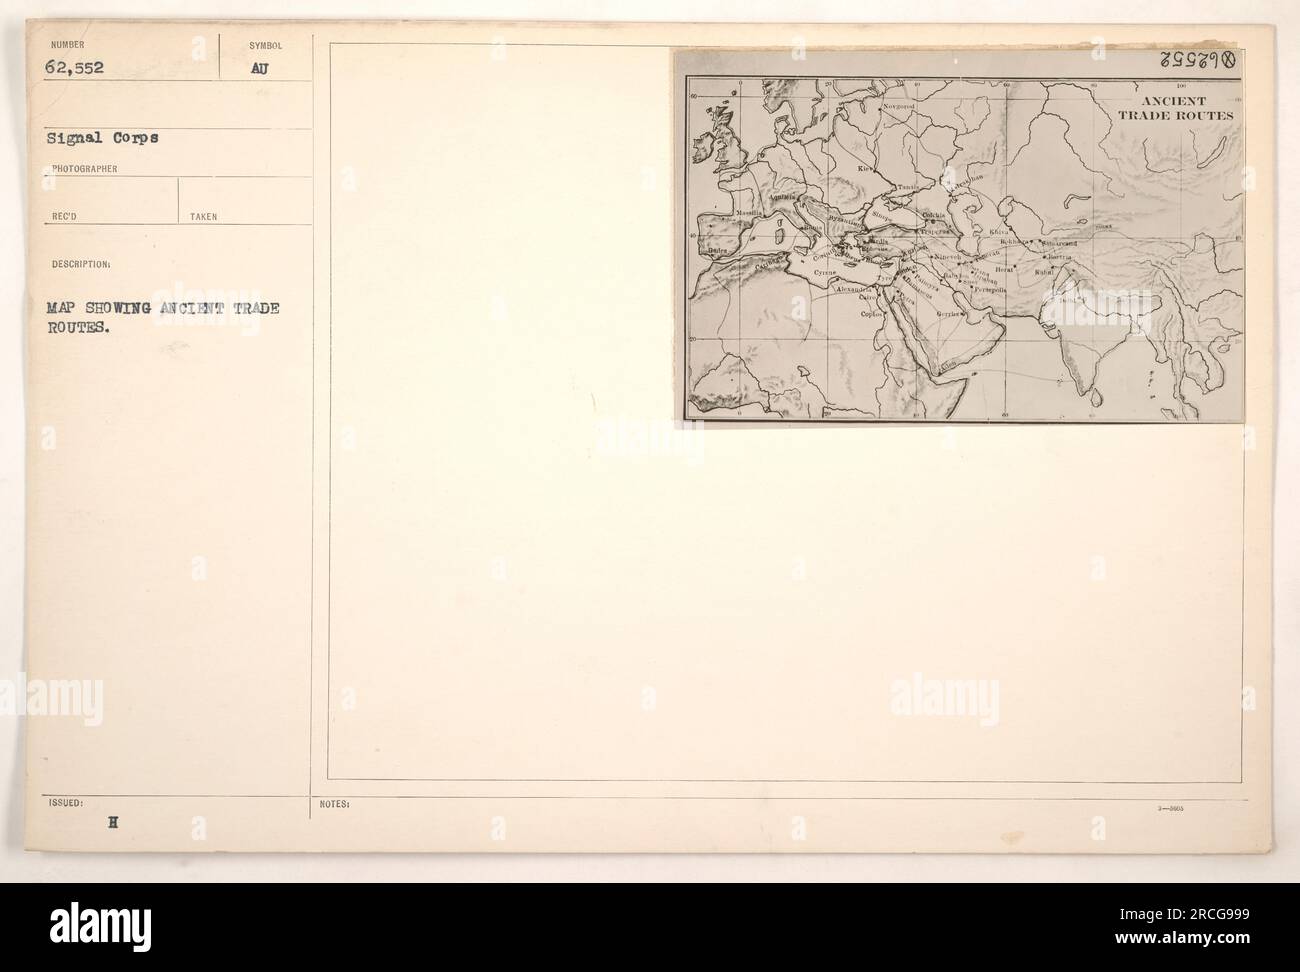 Photograph of a map showing ancient trade routes, taken by the Signal Corps during World War One. This map, numbered 62,552, was issued as part of the photographer's records. The map highlights different trade routes from ancient times. A symbol, labeled H, with attendant notes, labeled Al compite 899890, can be seen on the map. Stock Photo